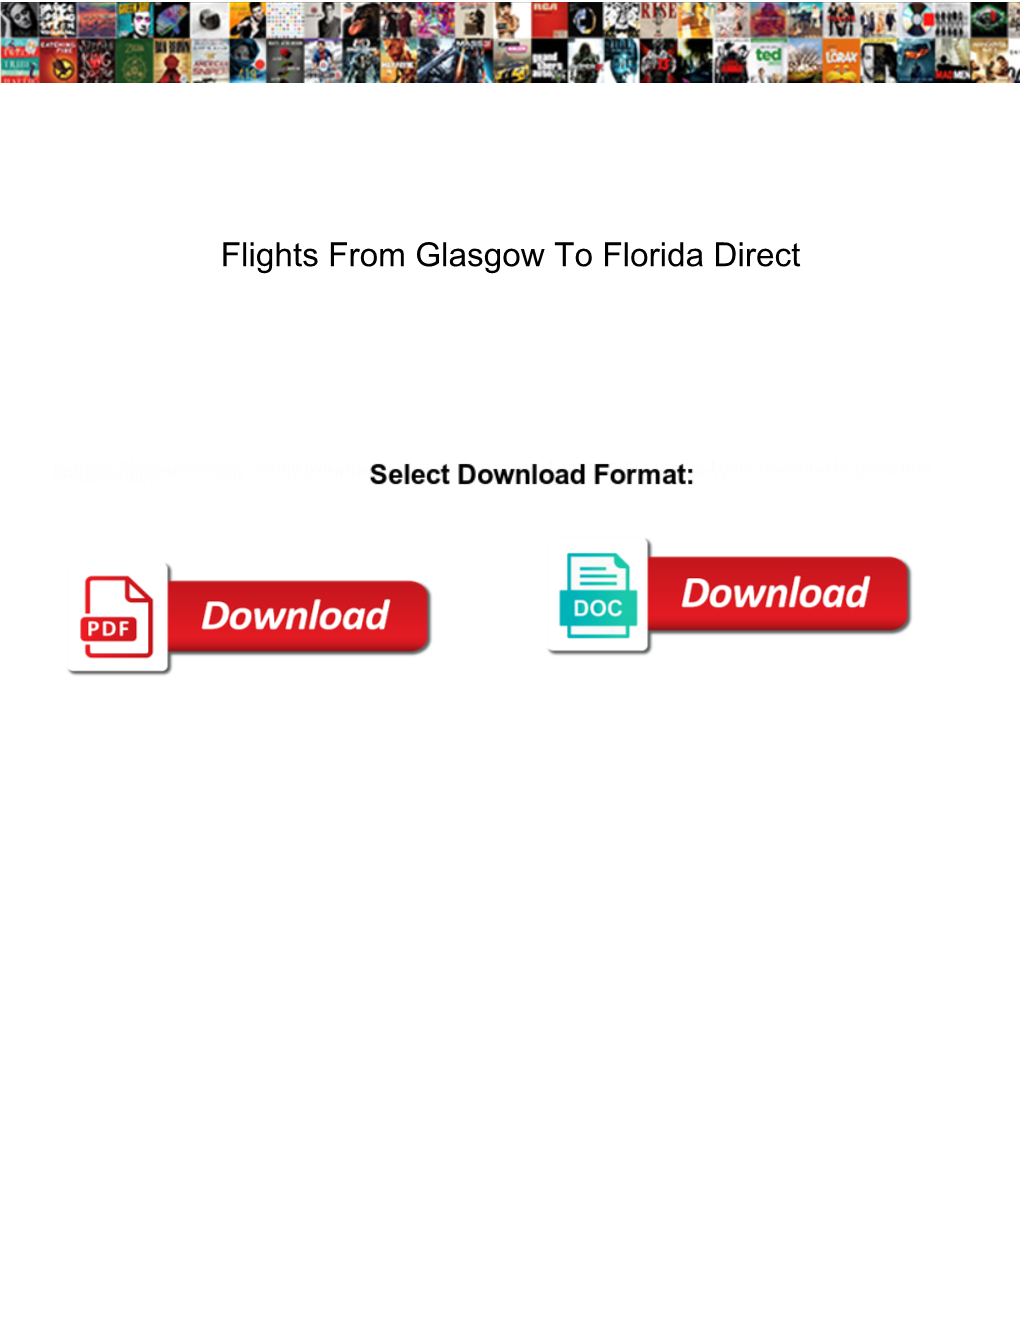 Flights from Glasgow to Florida Direct